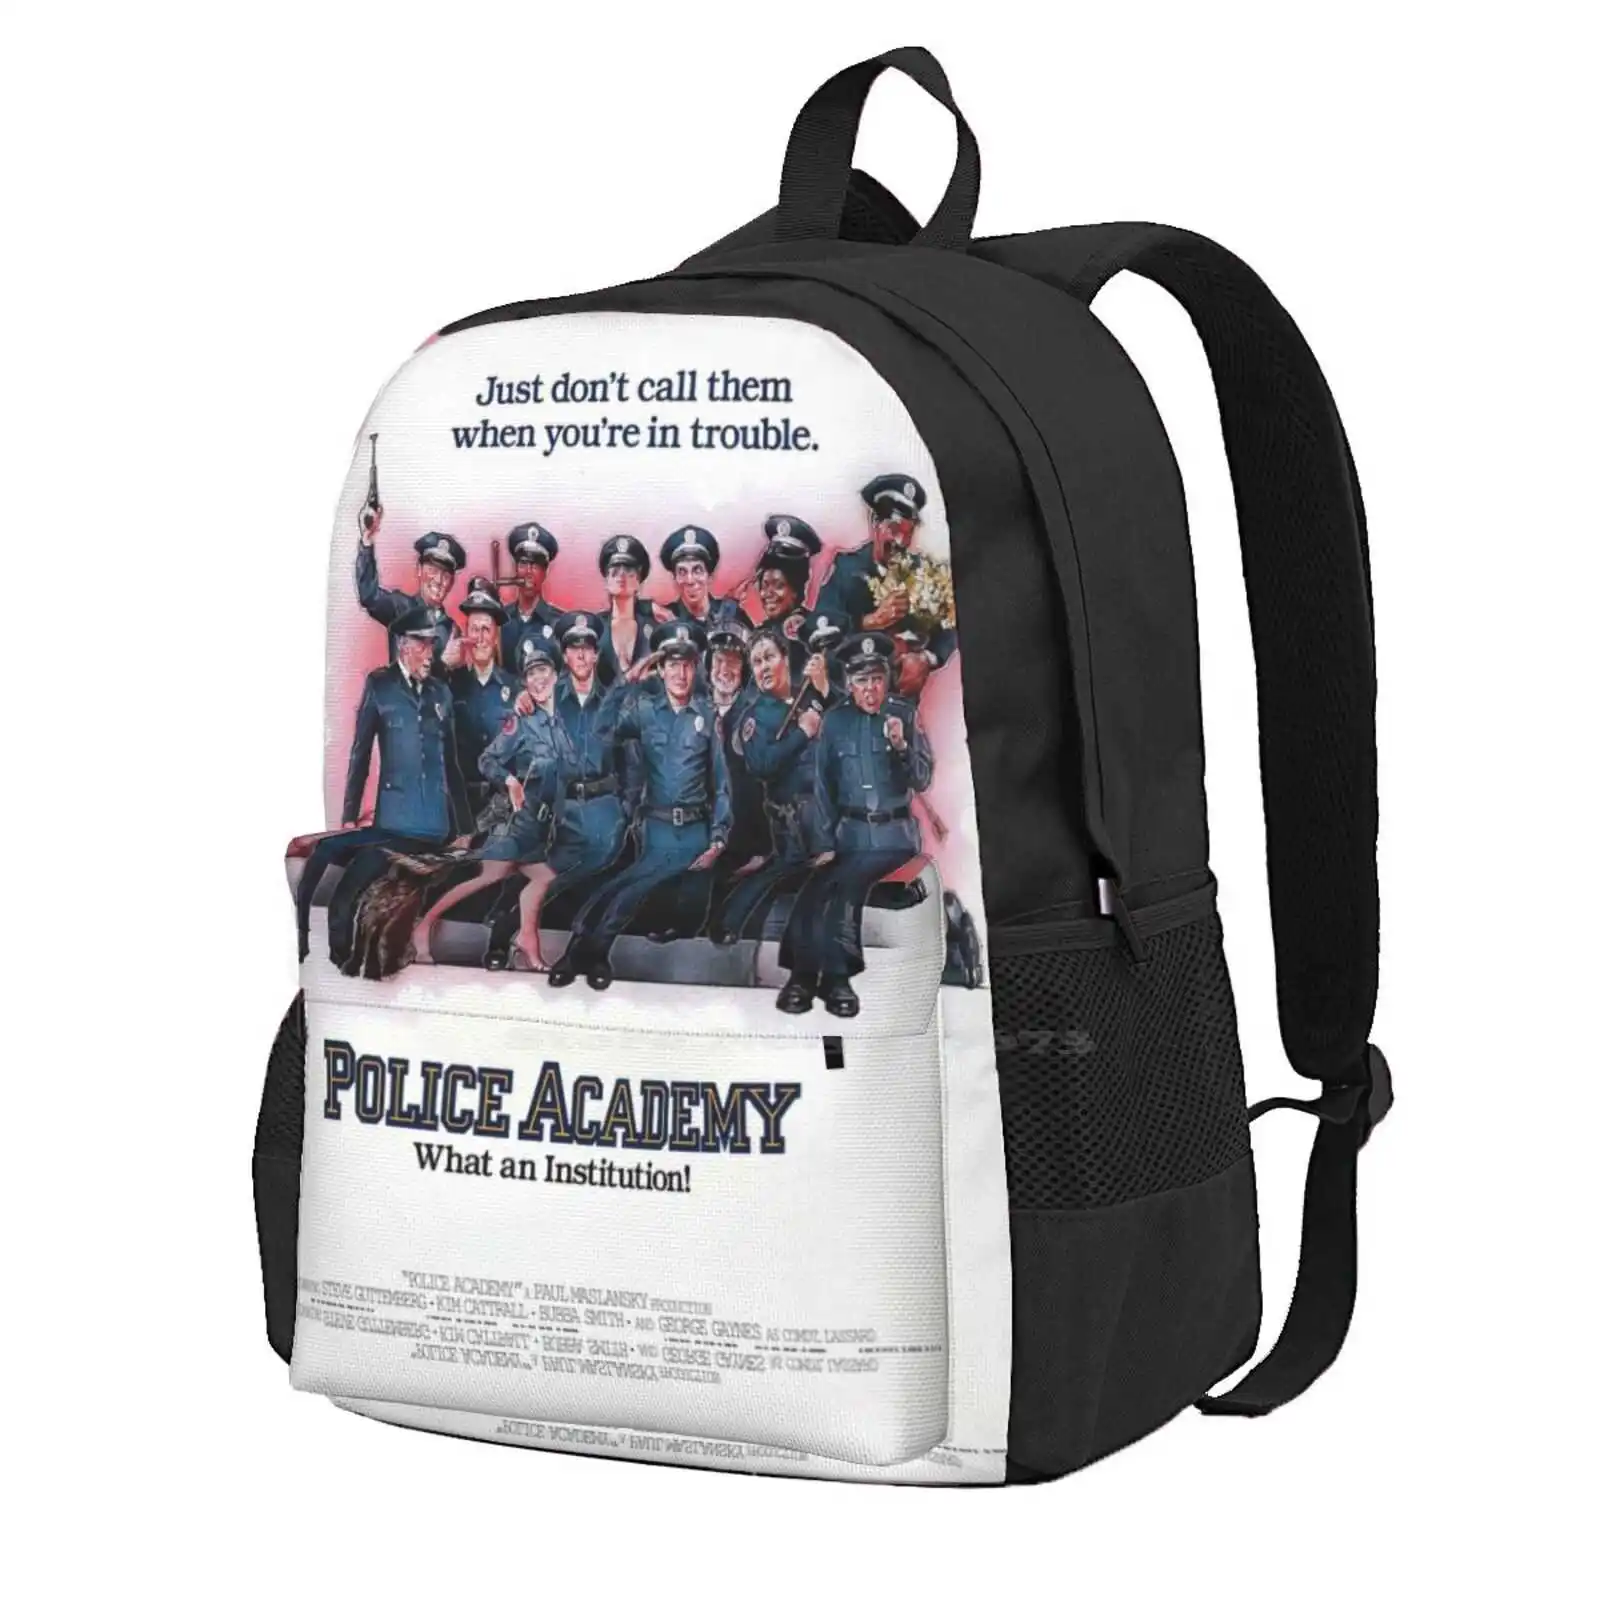 

Police Academy-Movie Poster ( 1984 ) Backpack For Student School Laptop Travel Bag Police Academy Cult Comedy Film 80S 1984